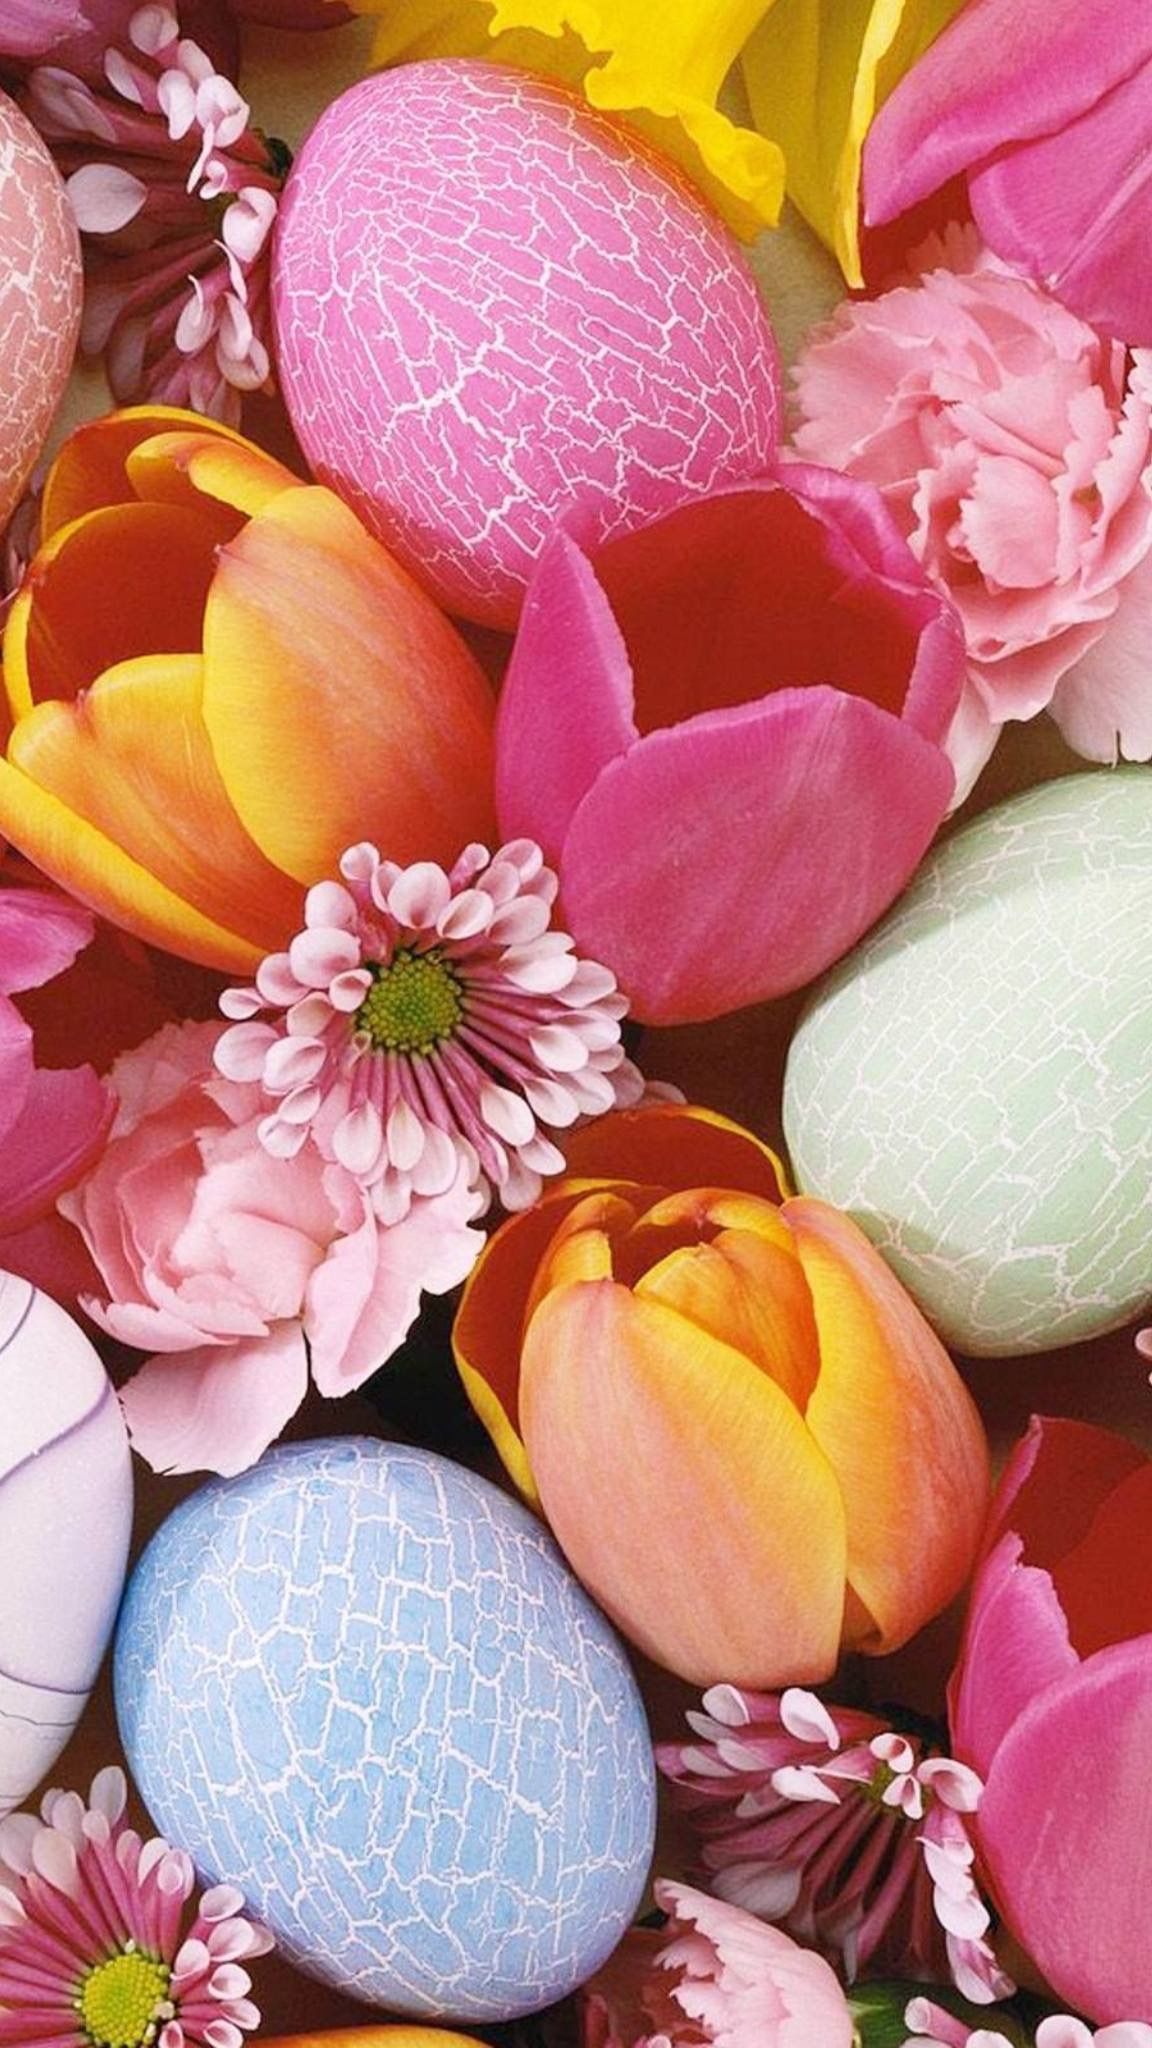 Mobile Wallpaper and Background. Happy easter wallpaper, Easter wallpaper, Easter image